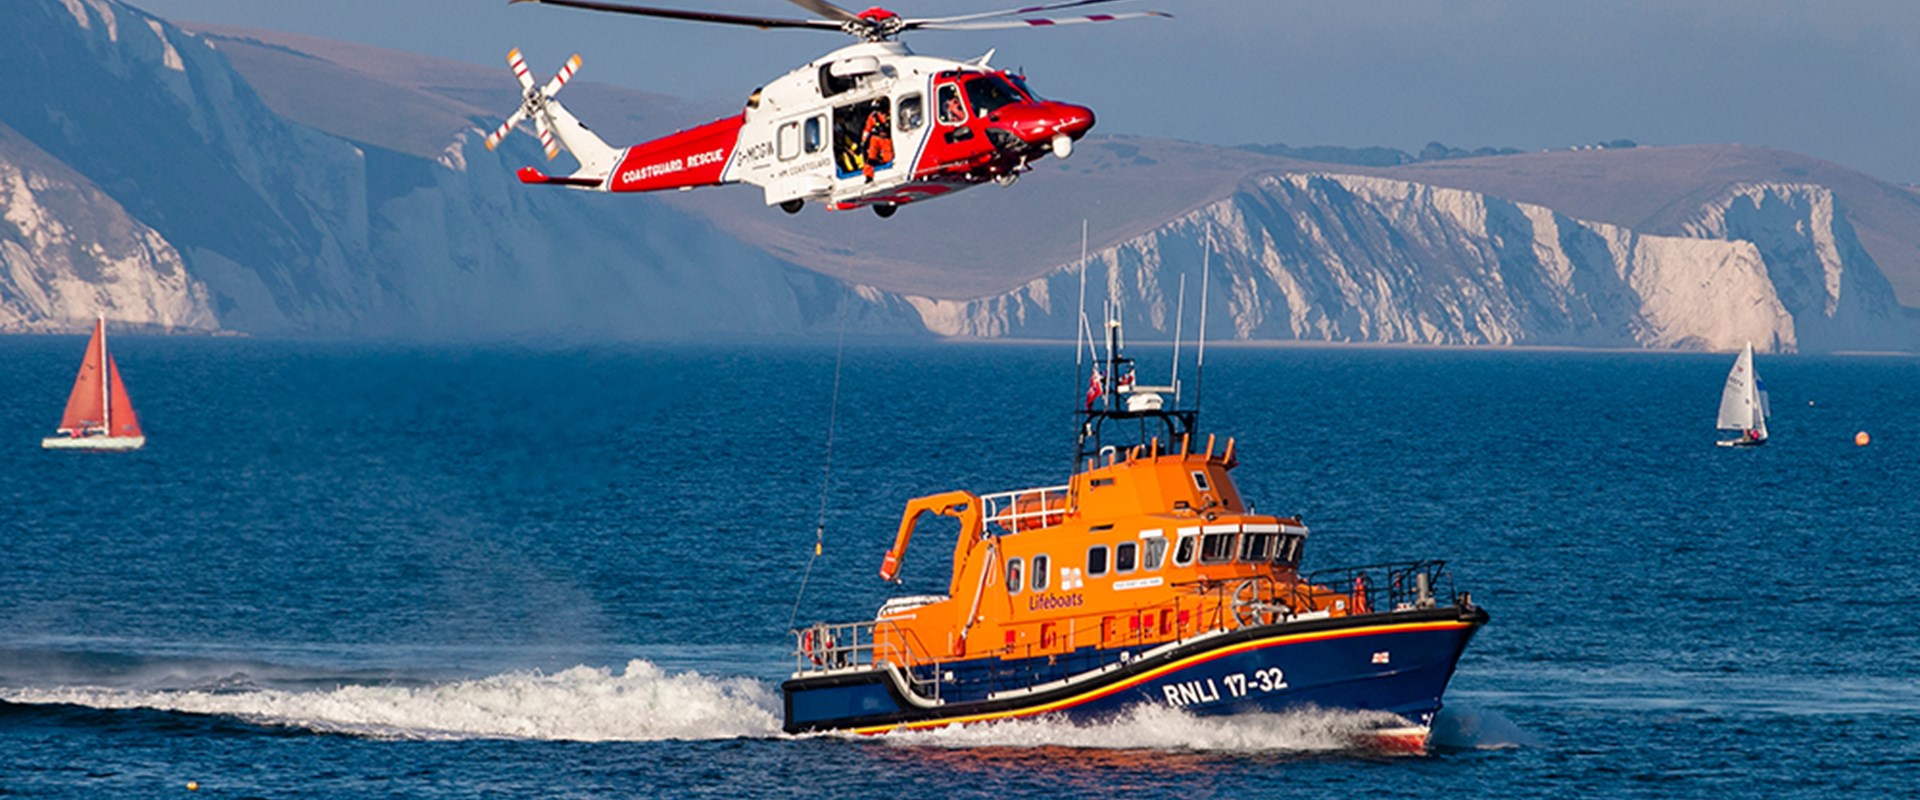 RNLI in concert with Helo